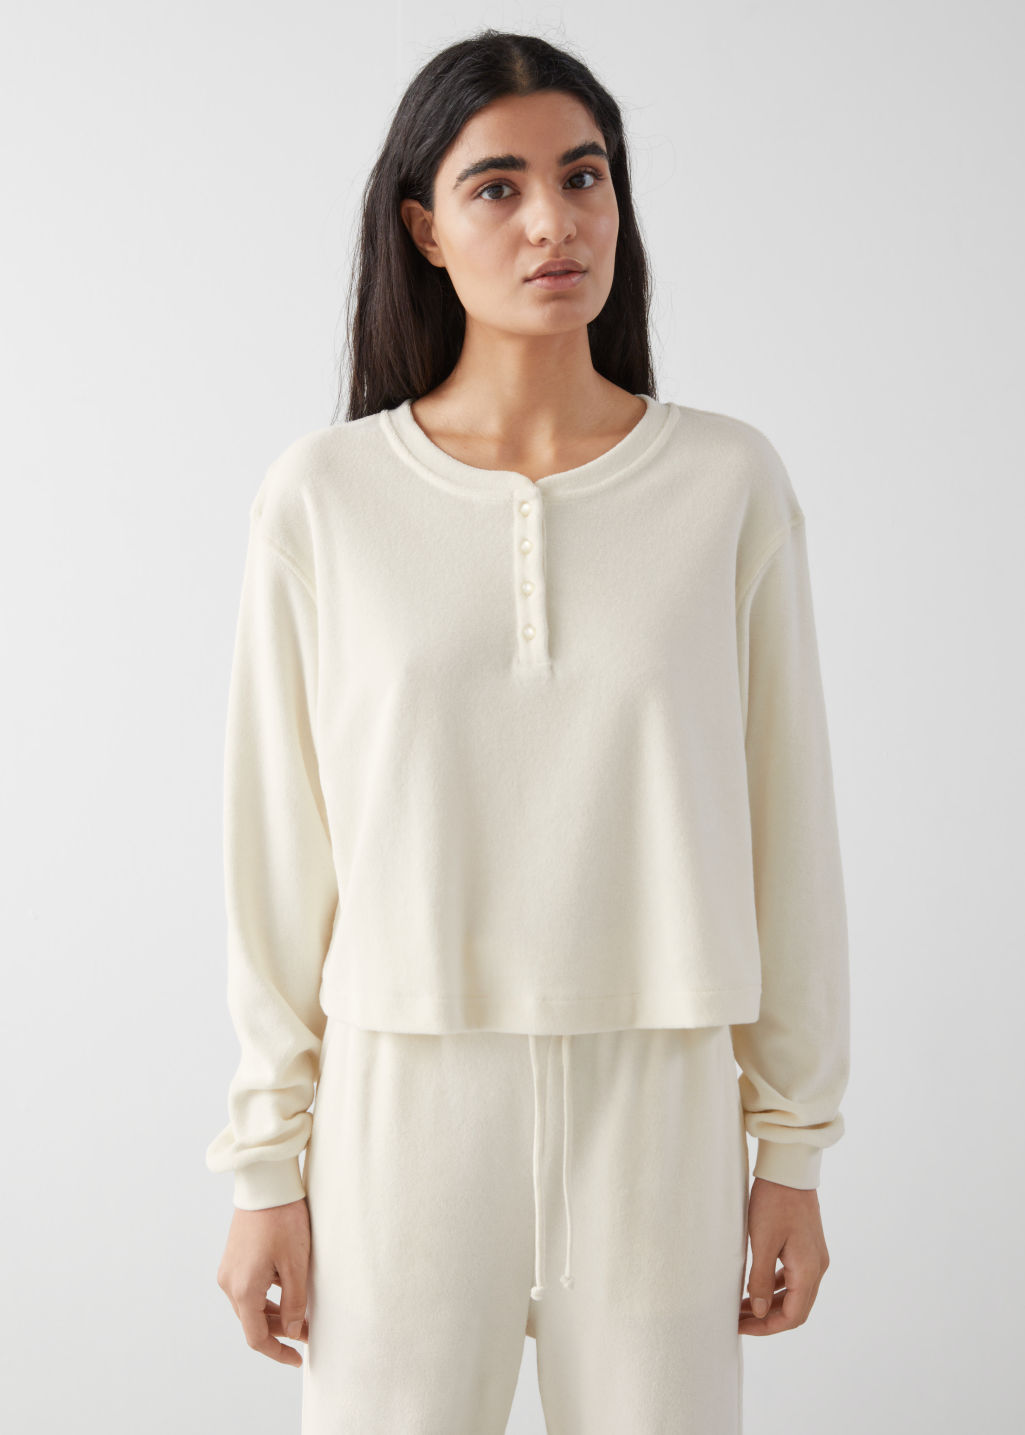 Boxy Pearl Button Top - Mint - Sweatshirts & Hoodies - & Other Stories